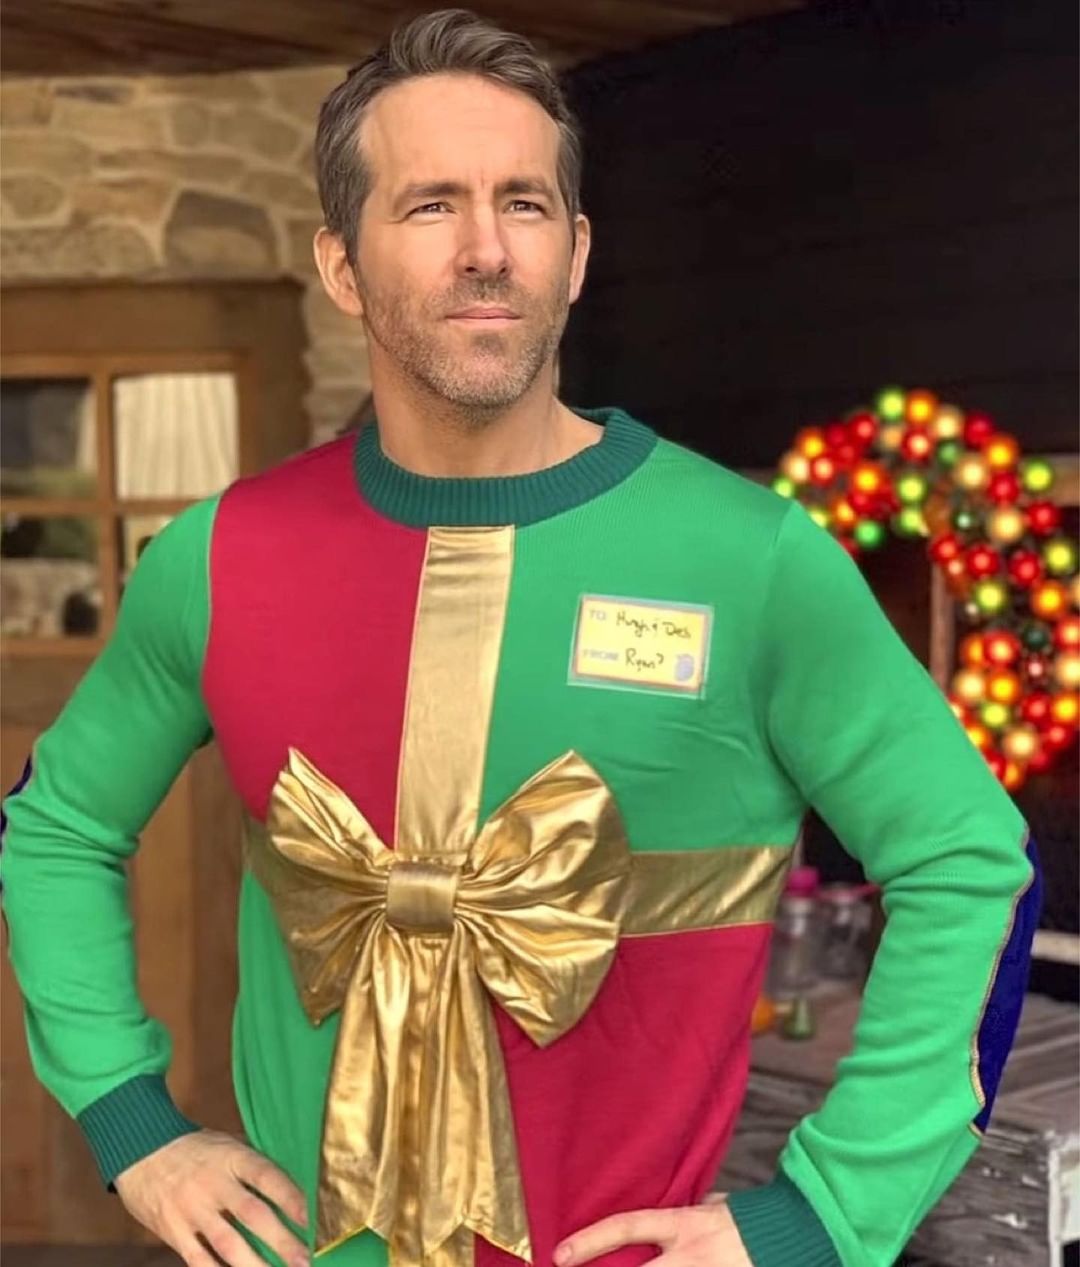 How Many Kids Does Ryan Reynolds Have? Does Ryan Reynolds Have A Son?